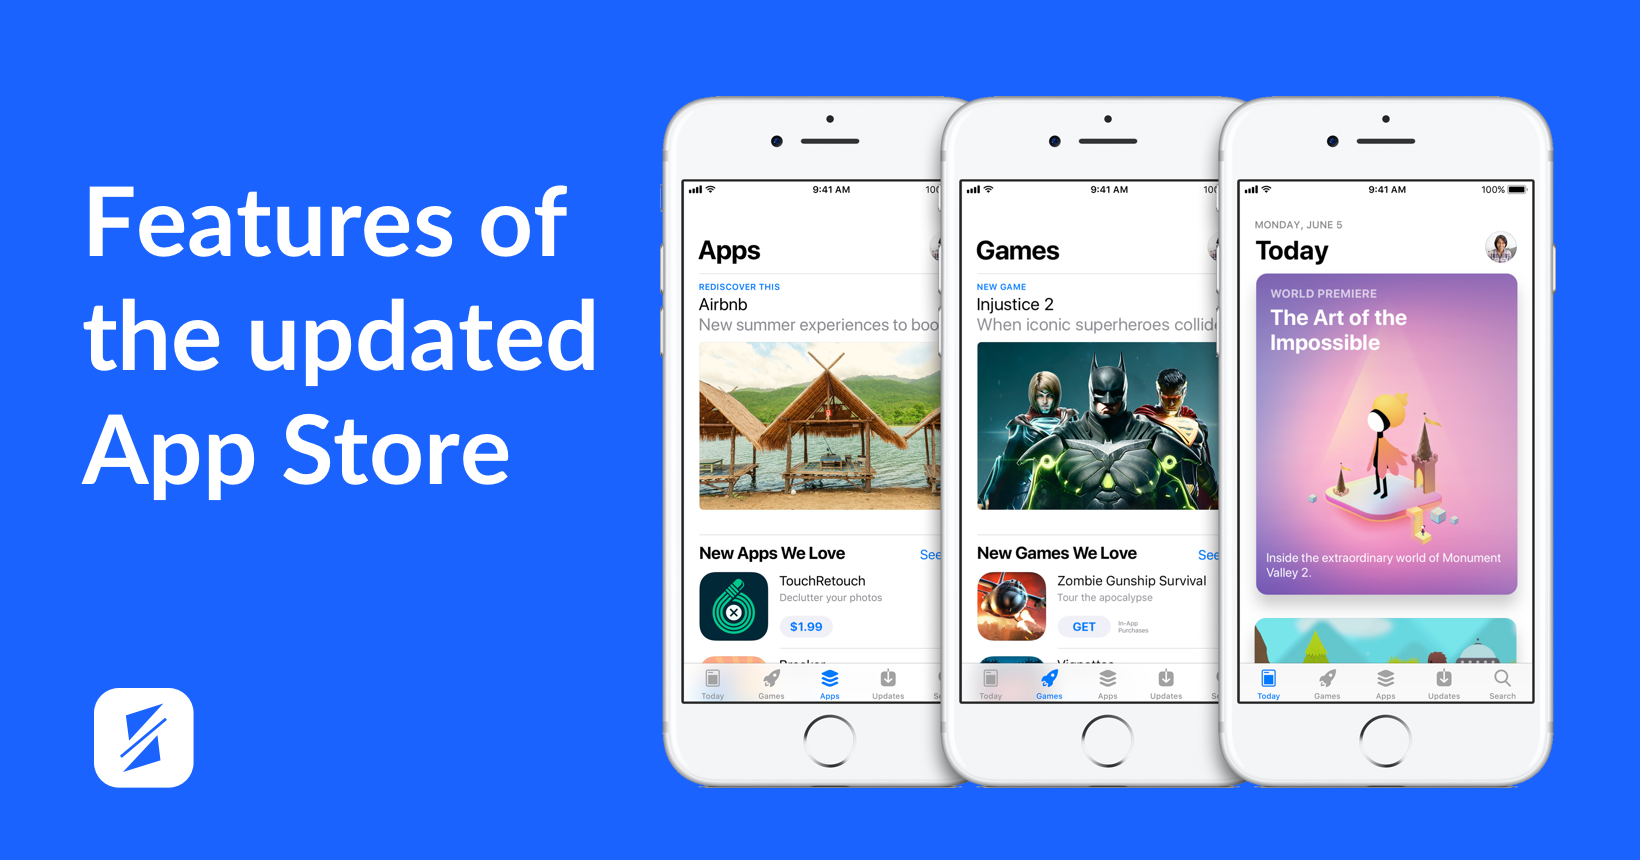 What is App Store?